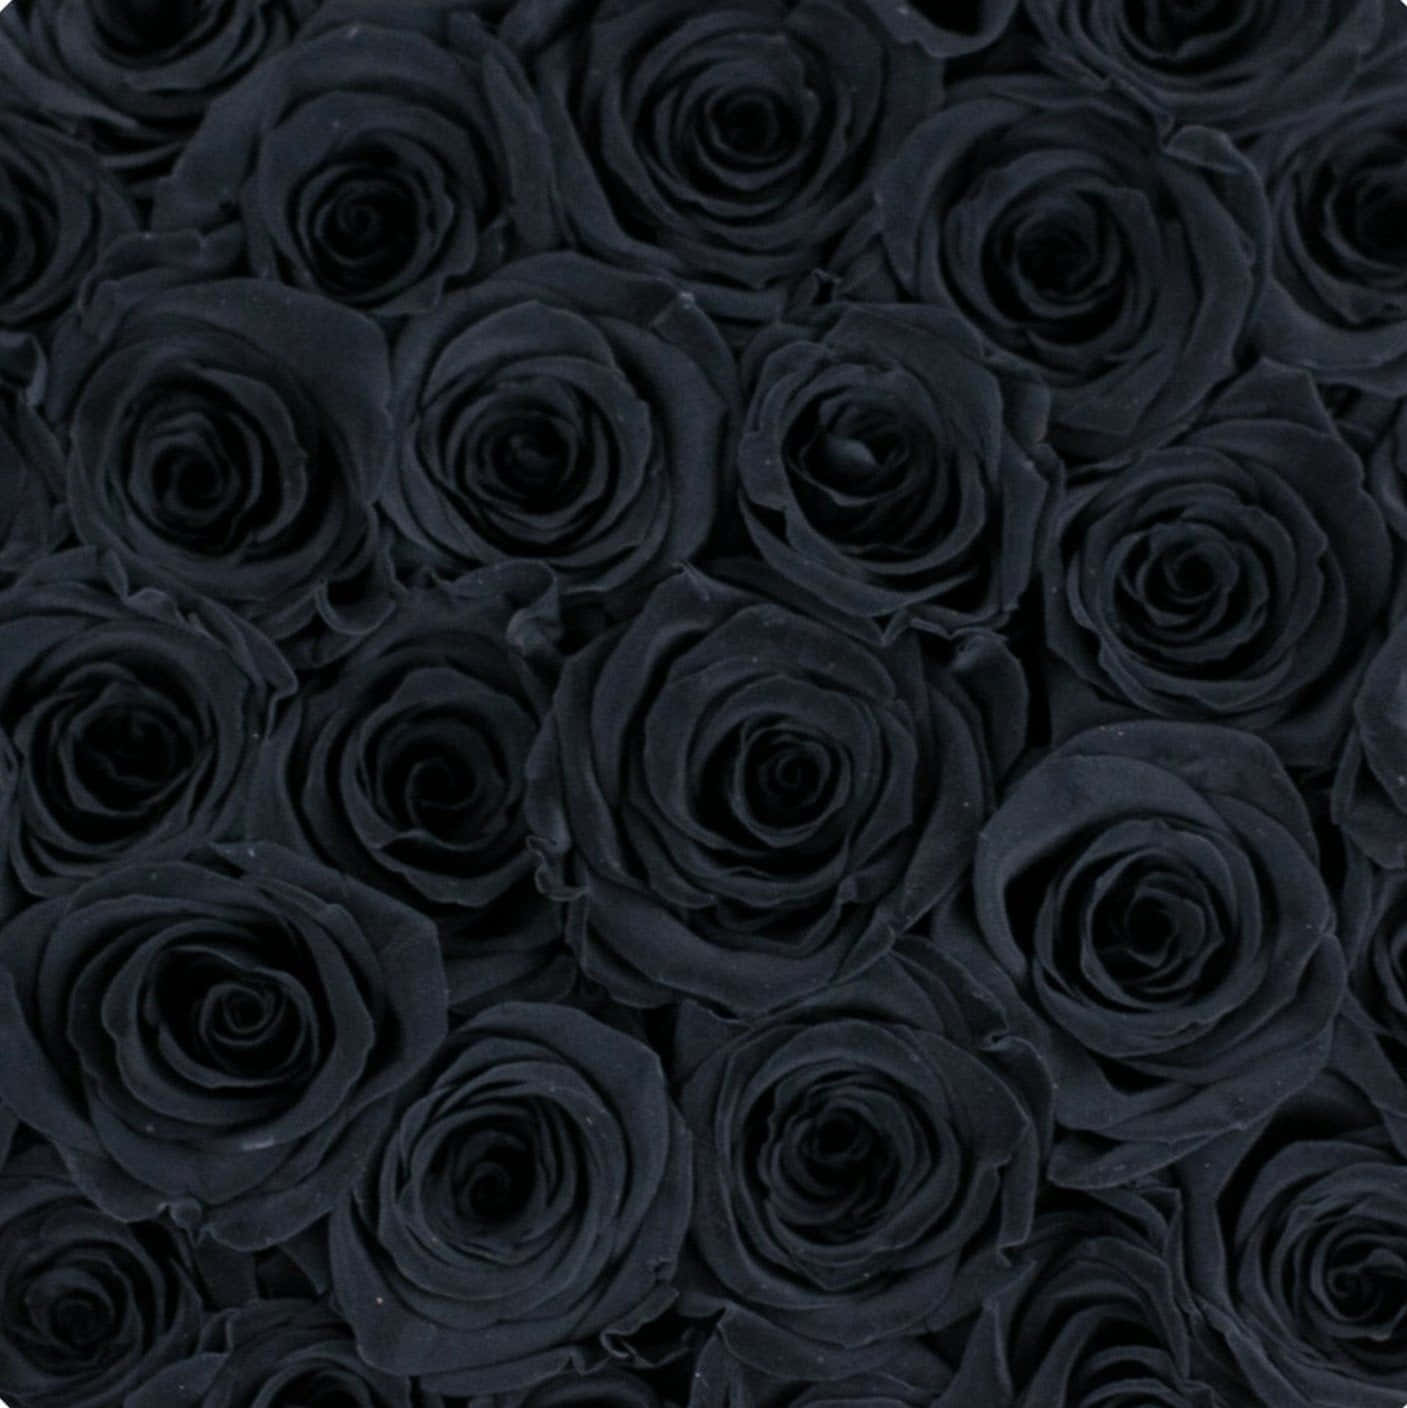 Embrace The Mysterious Beauty Of The Black Rose